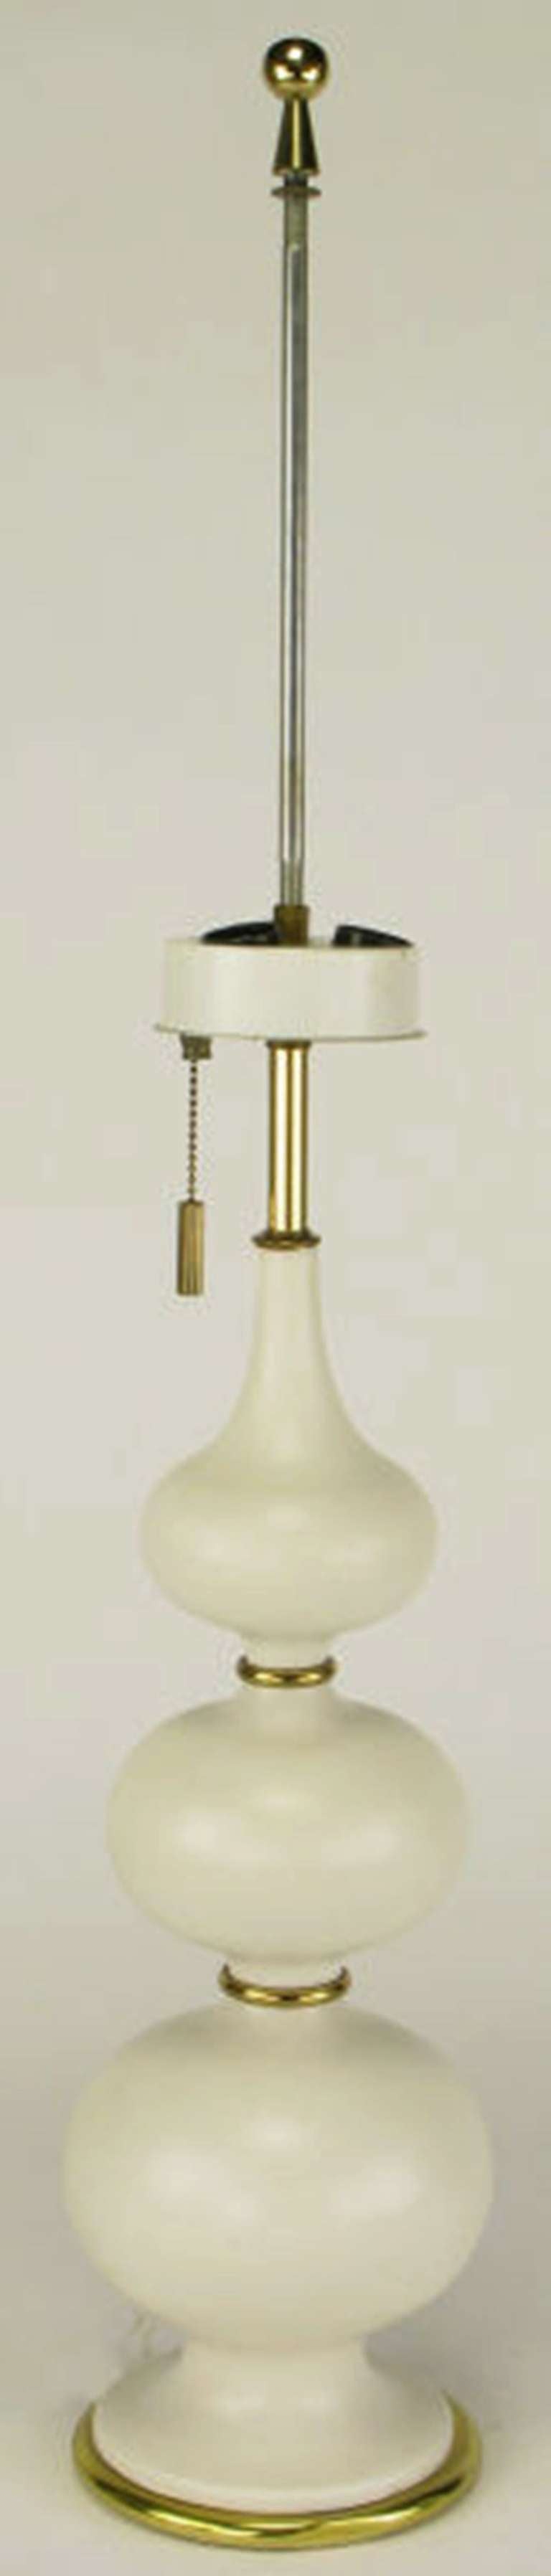 Stunning Lightolier table lamp in white satin glazed ceramic stacked spherical bodies. Each segment separated by a brass ring spacer. Base is a brass plate. The three socket lighting element with pull chain is original. Sold sans shade.

 